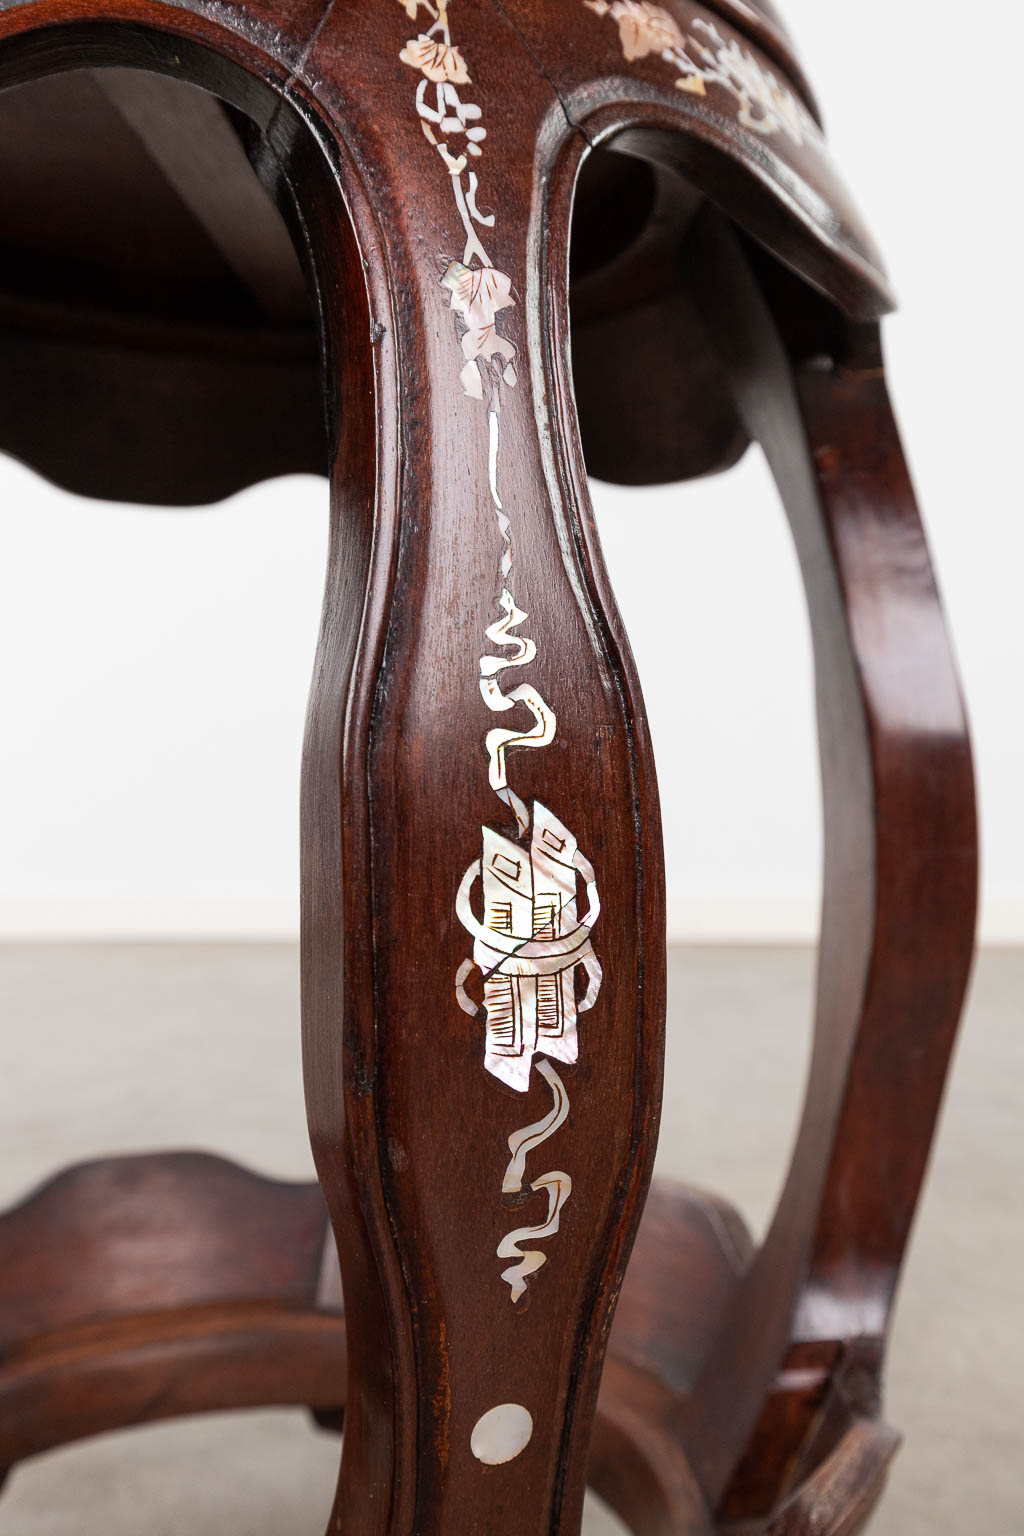 A Chinese hardwood stand, inlaid with mother of pearl. (H: 46 x D: 40 cm)